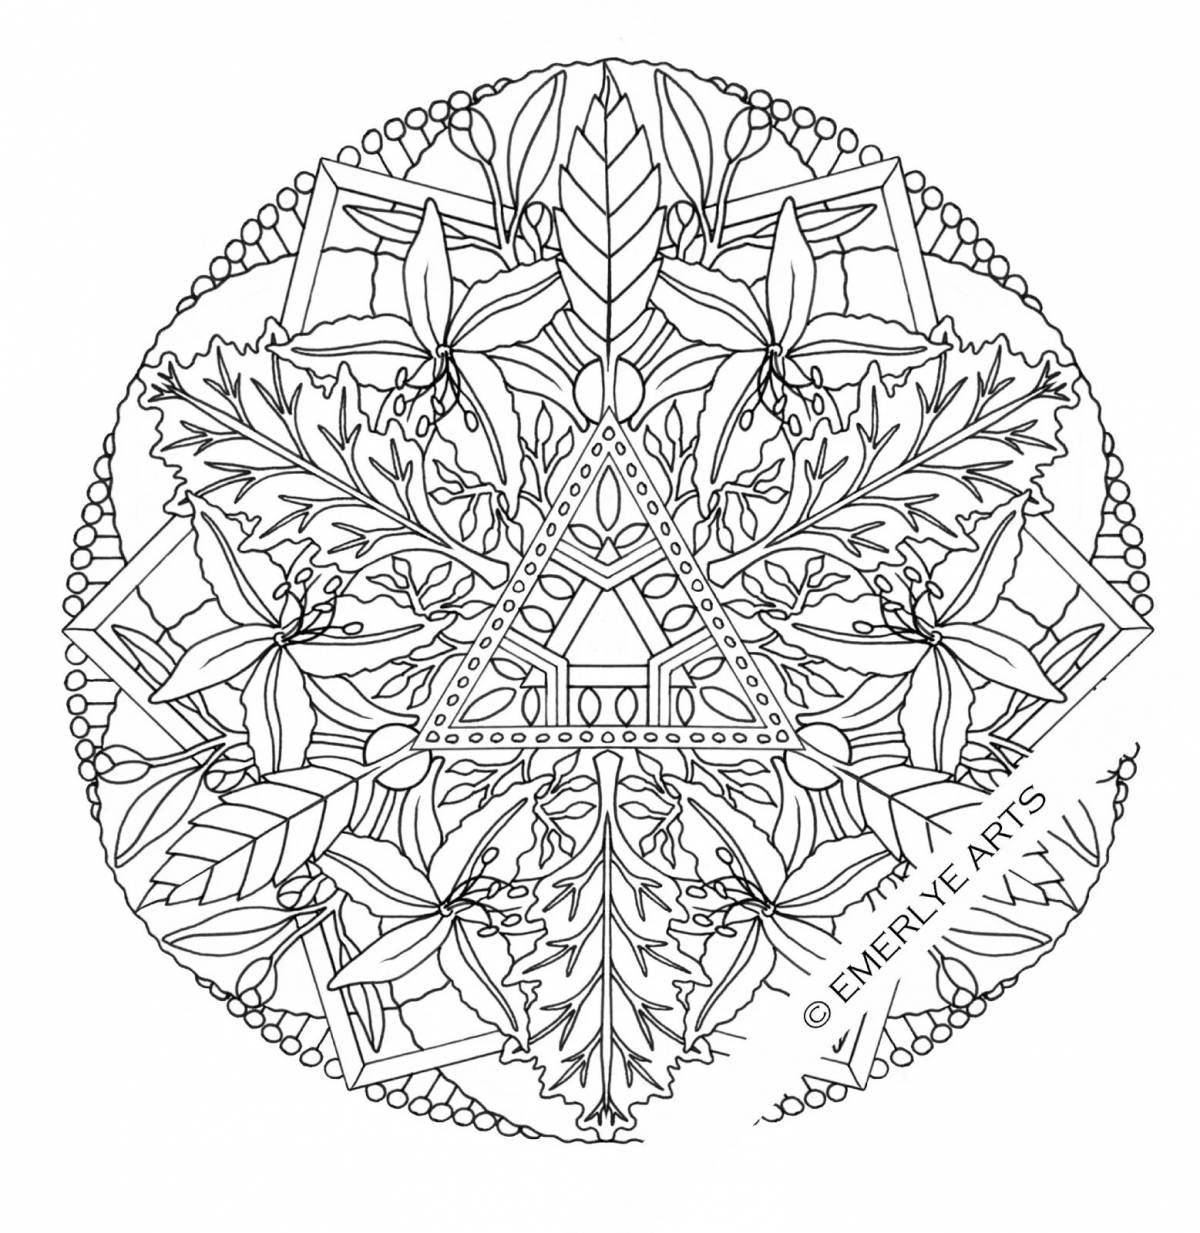 Sublime coloring page antistress mandala for adults en